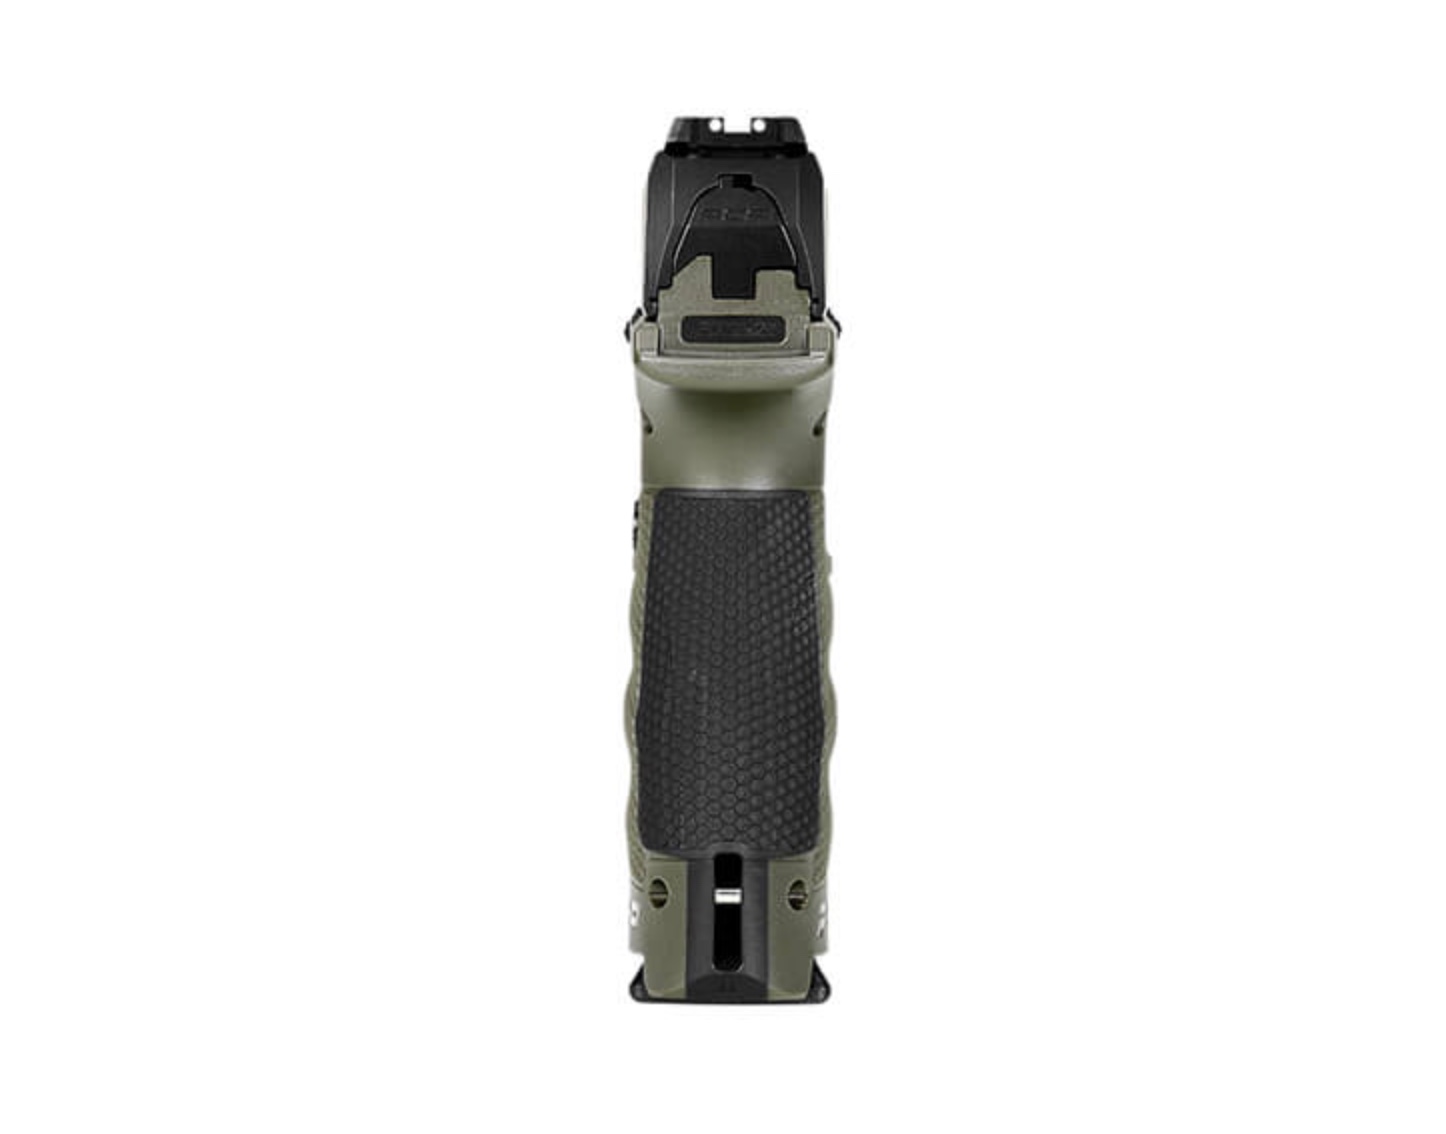 WALTHER-PDP-Compact-9-mm-Luger-Pistole-Green-4-22-15-Schuss-Magazin-Optik-Ready_252vppgWHcKGvi